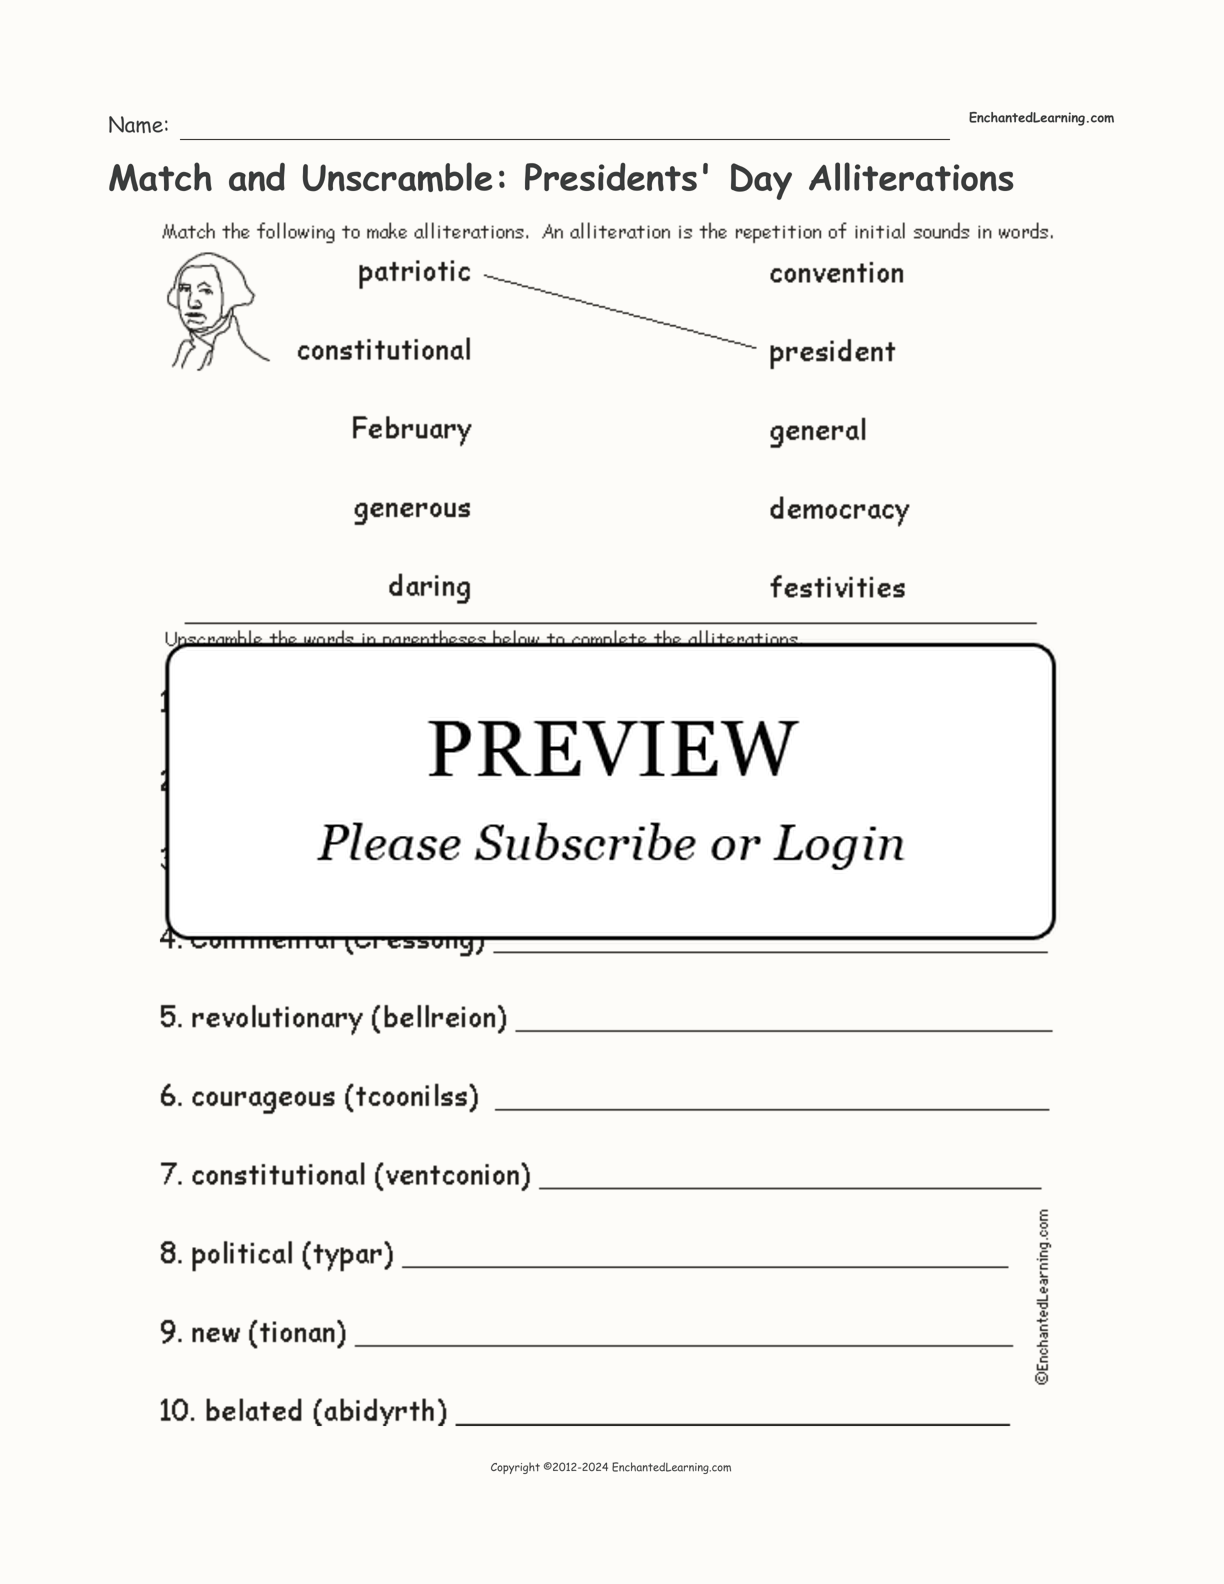 Match and Unscramble: Presidents' Day Alliterations interactive worksheet page 1